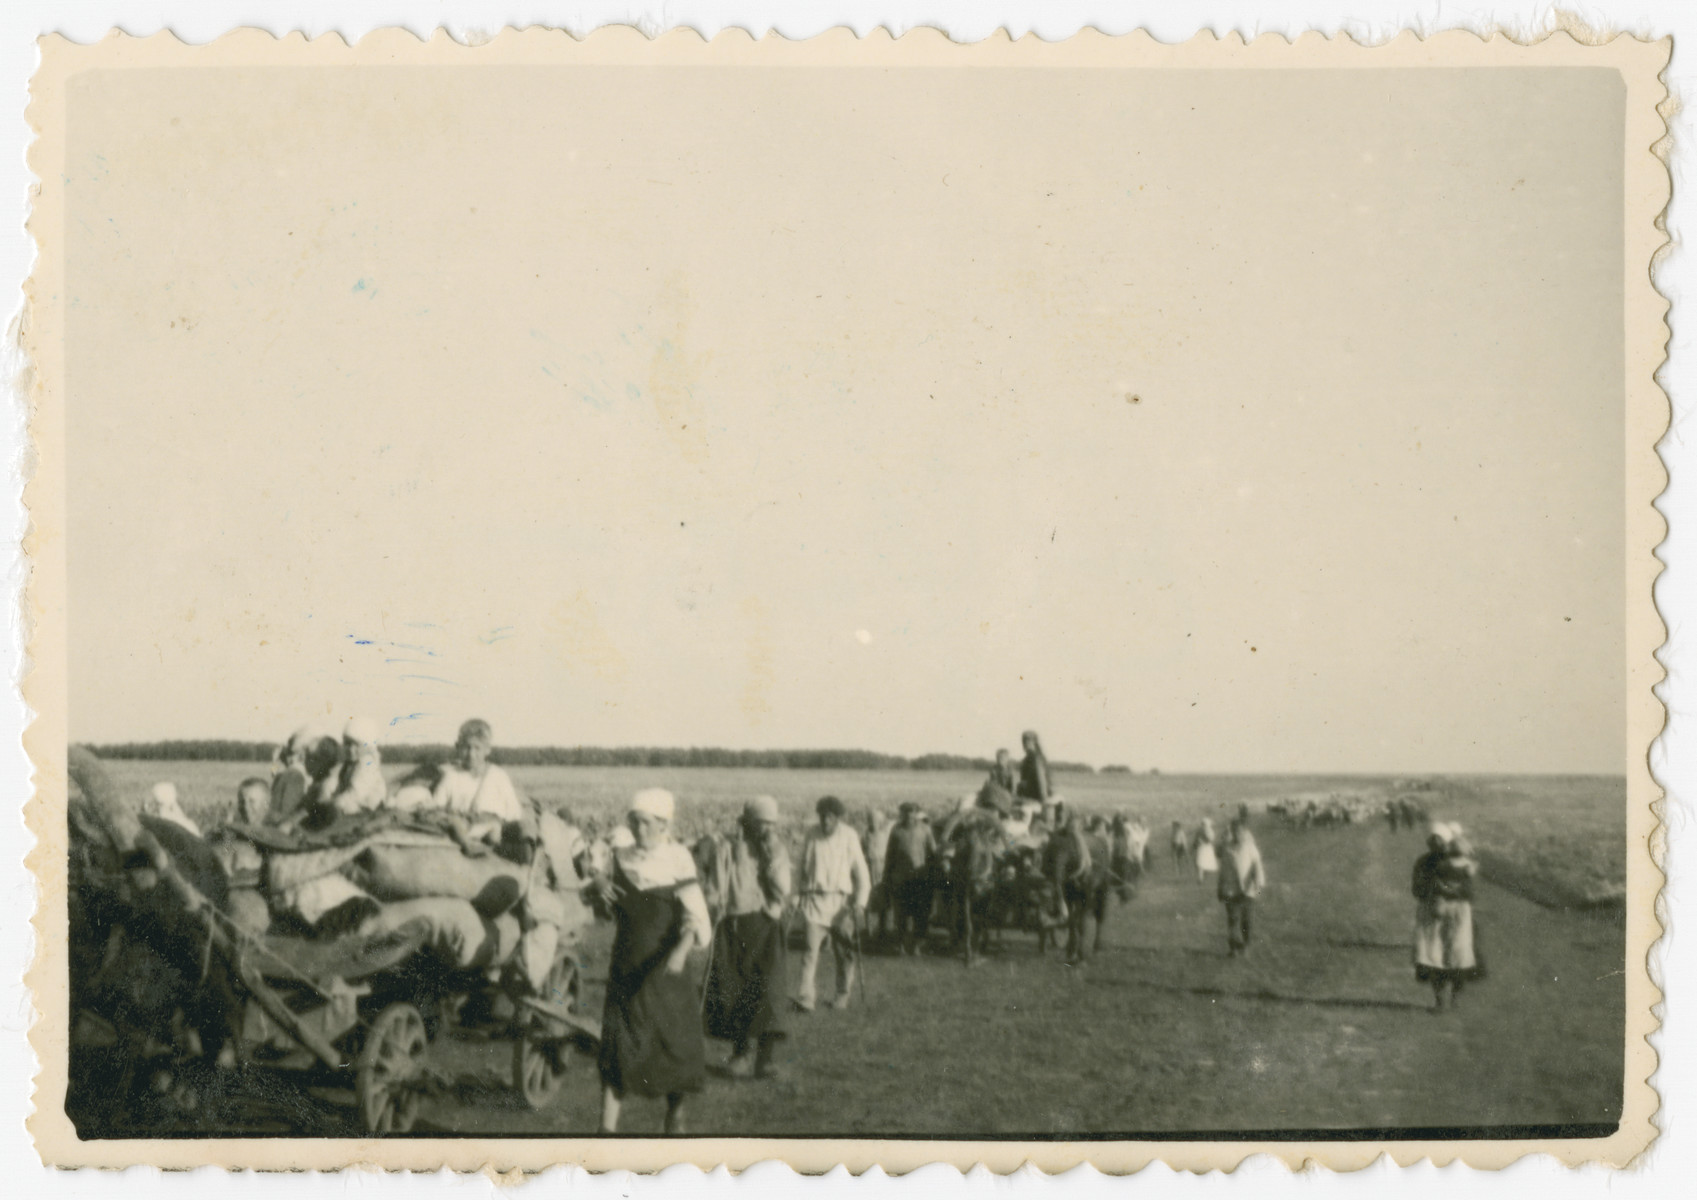 Photograph of civilians and wagons laden with  personal belongings taken during a possible resettlement action.